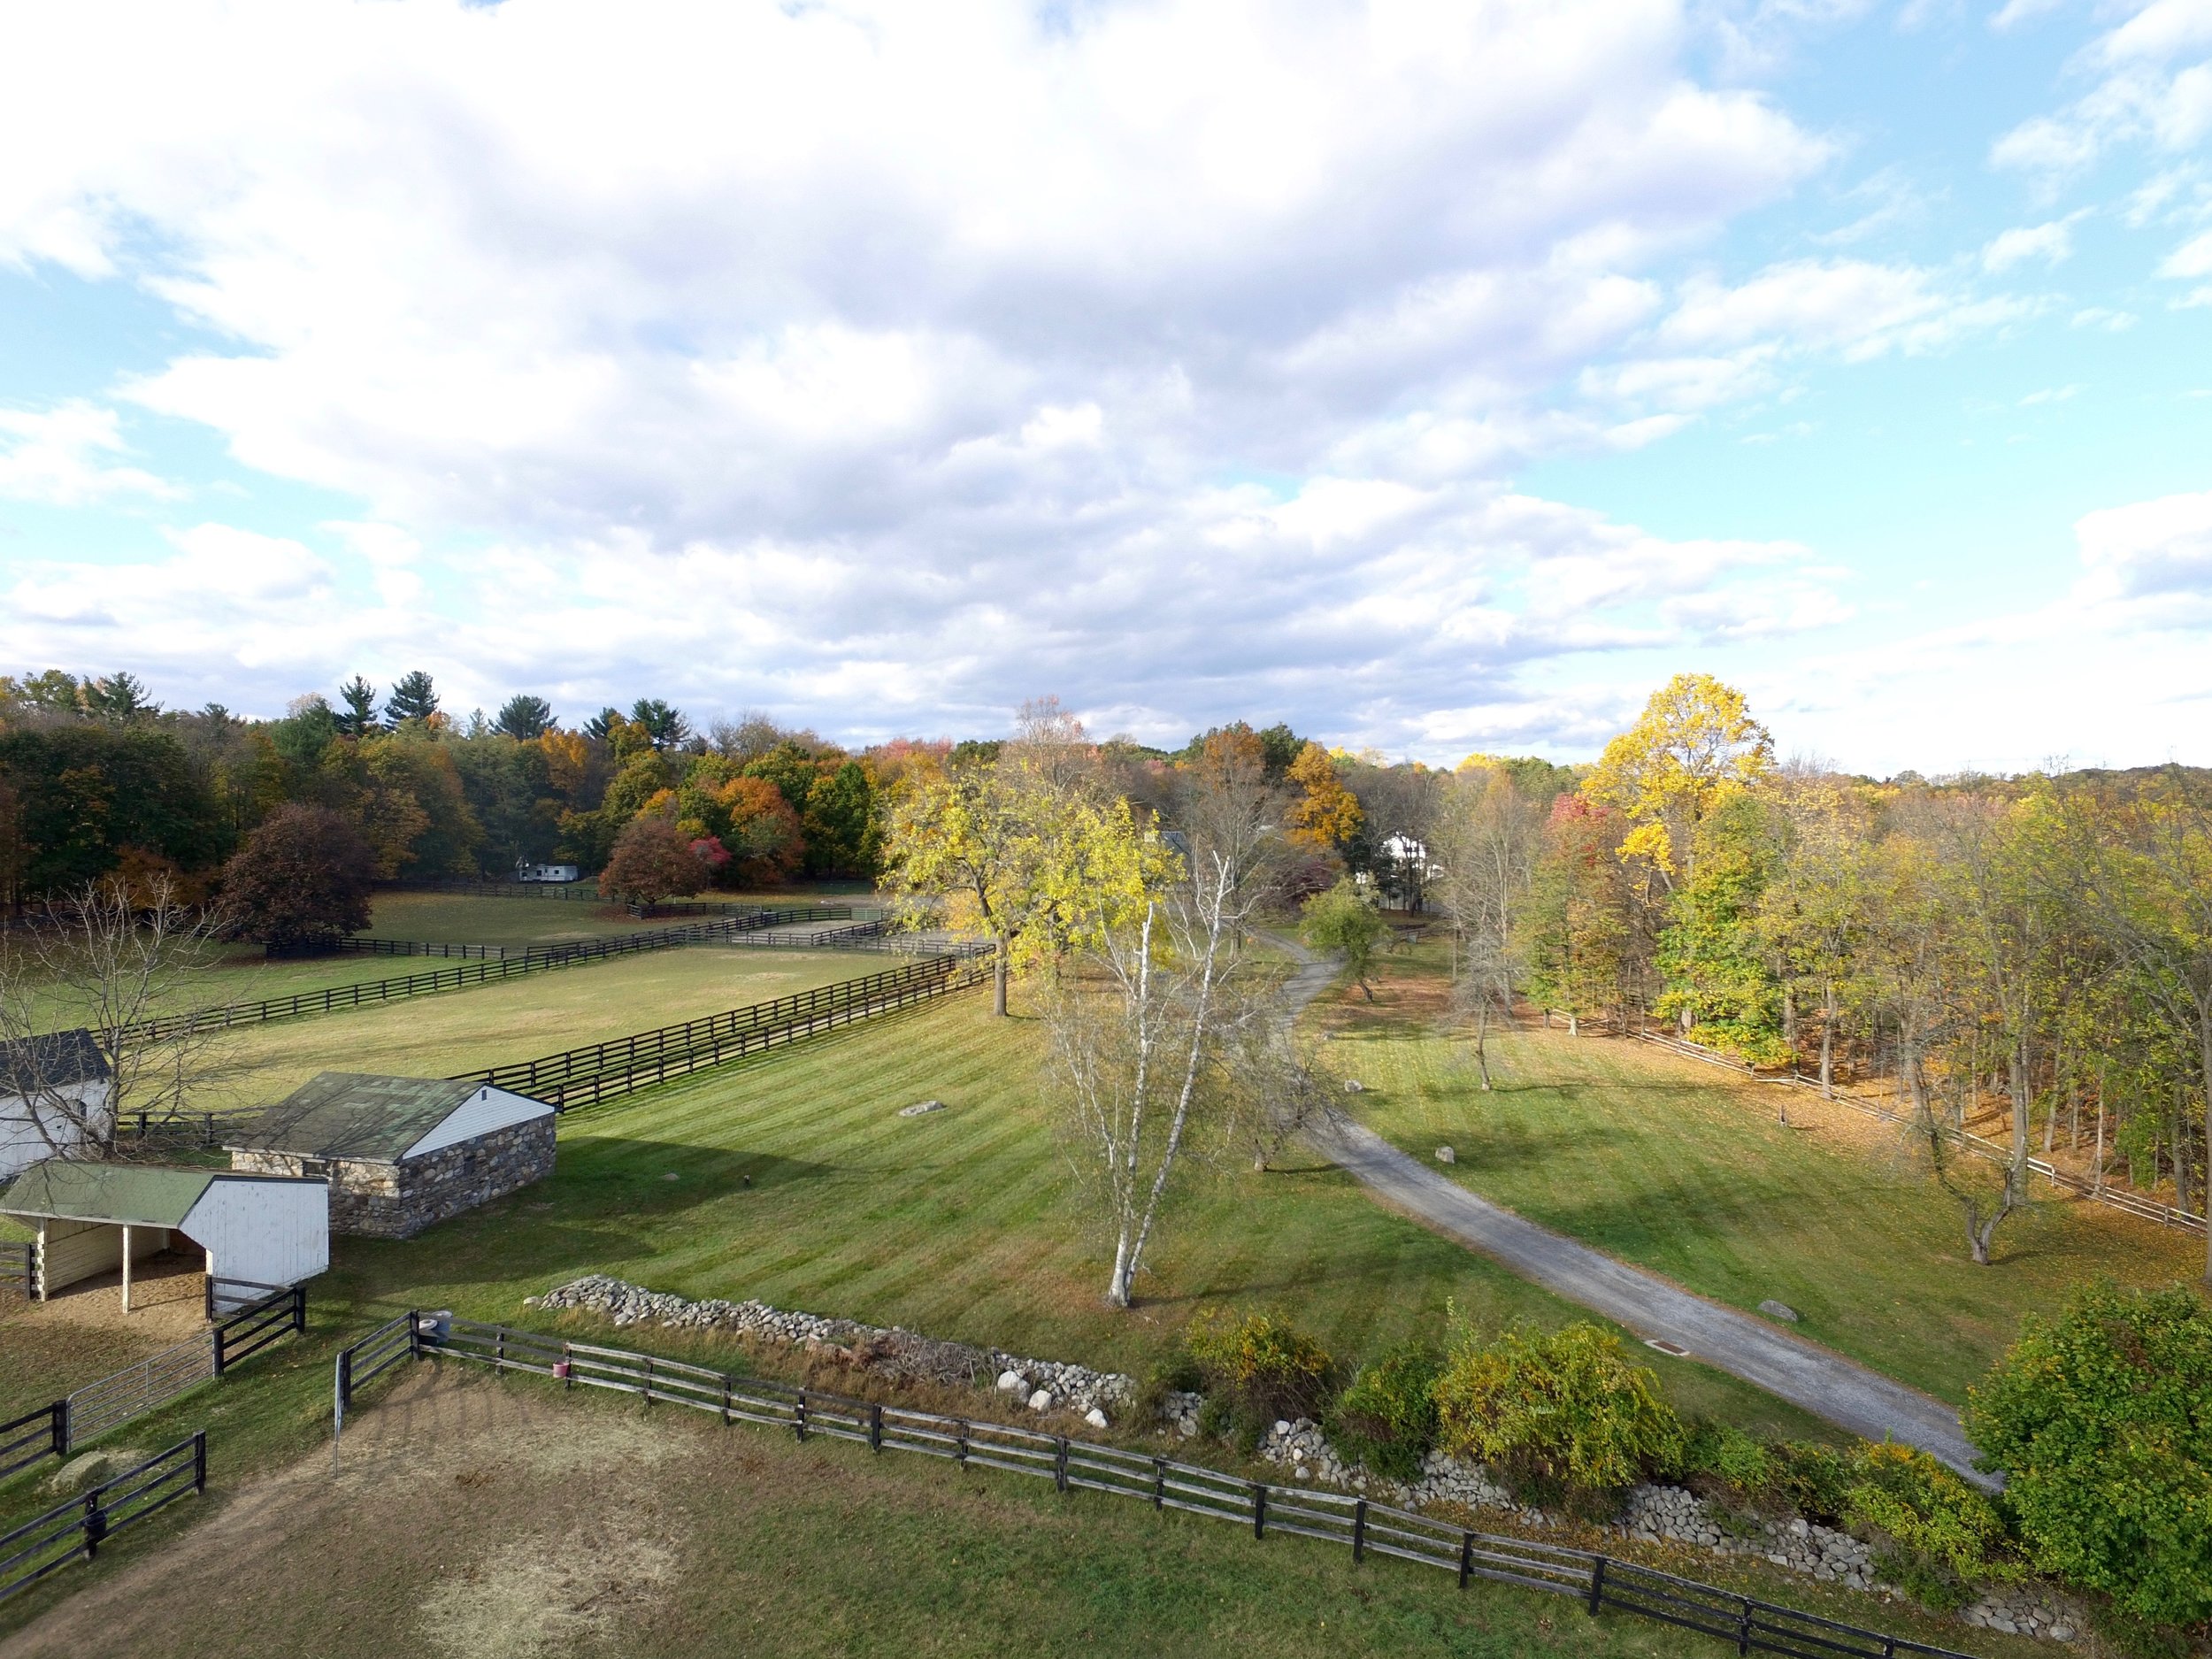 Drone picture of south end of farm including pastures and old stone building